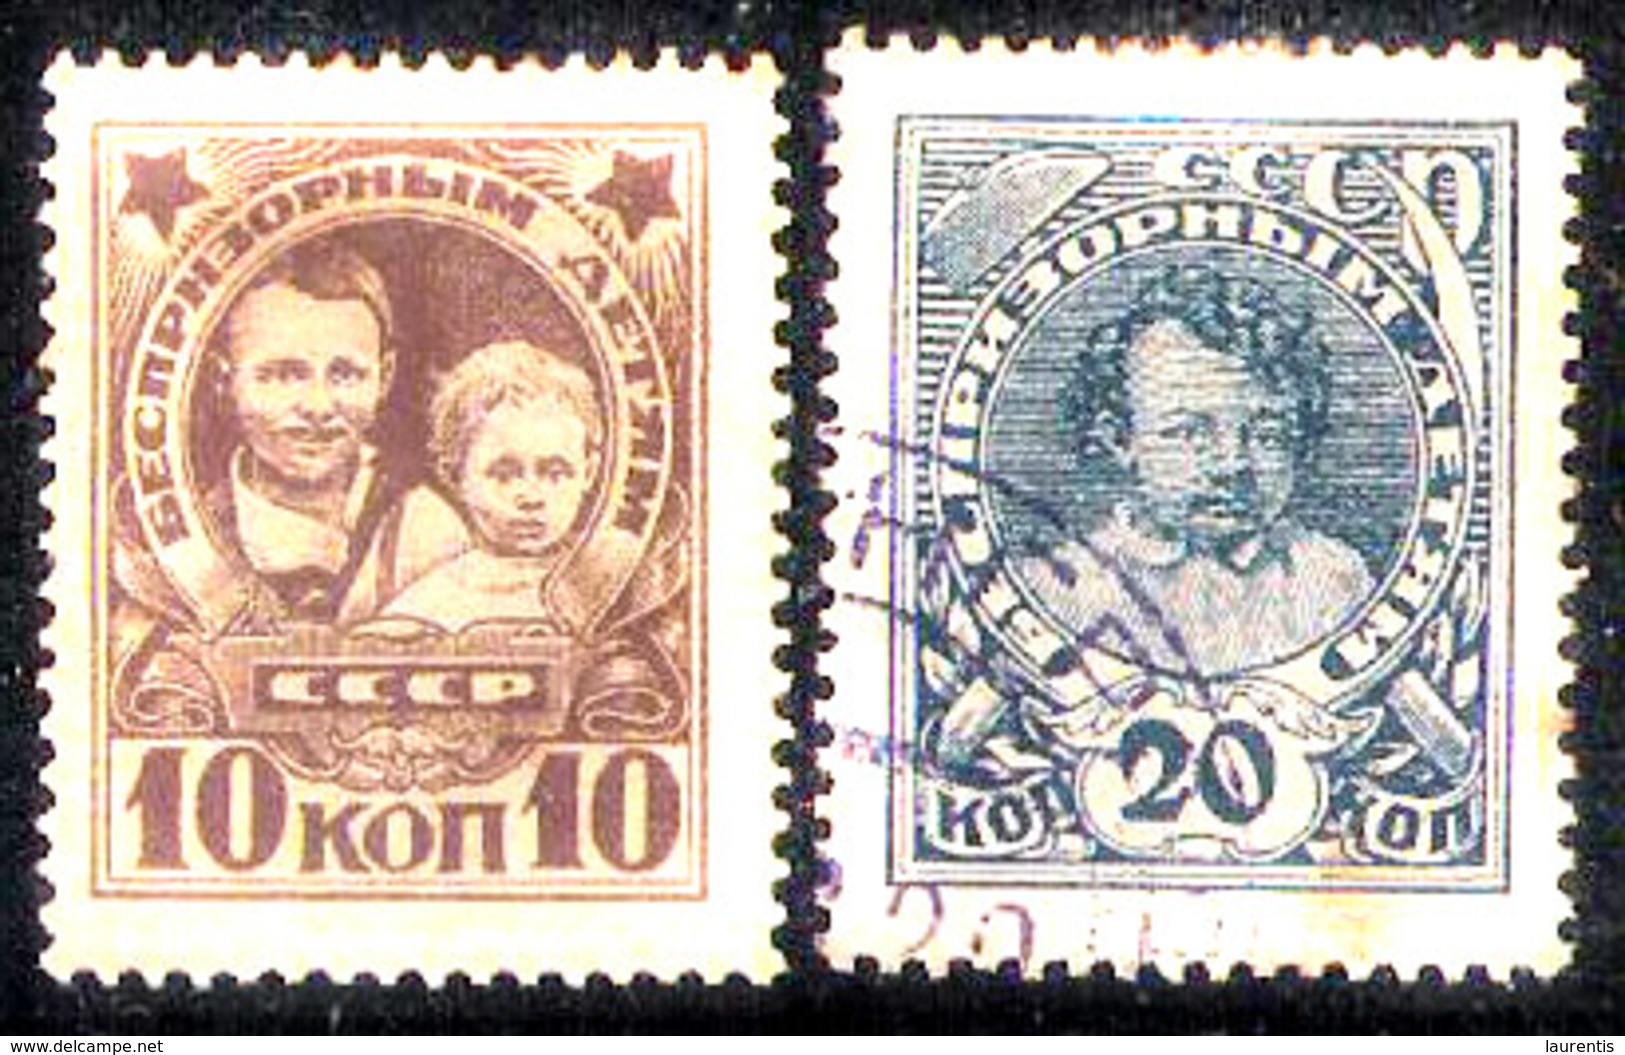 7399  Russia Yv 361 No Gum + 362 Used - No Gum - Free Shipping - 1,50 (3) - Used Stamps